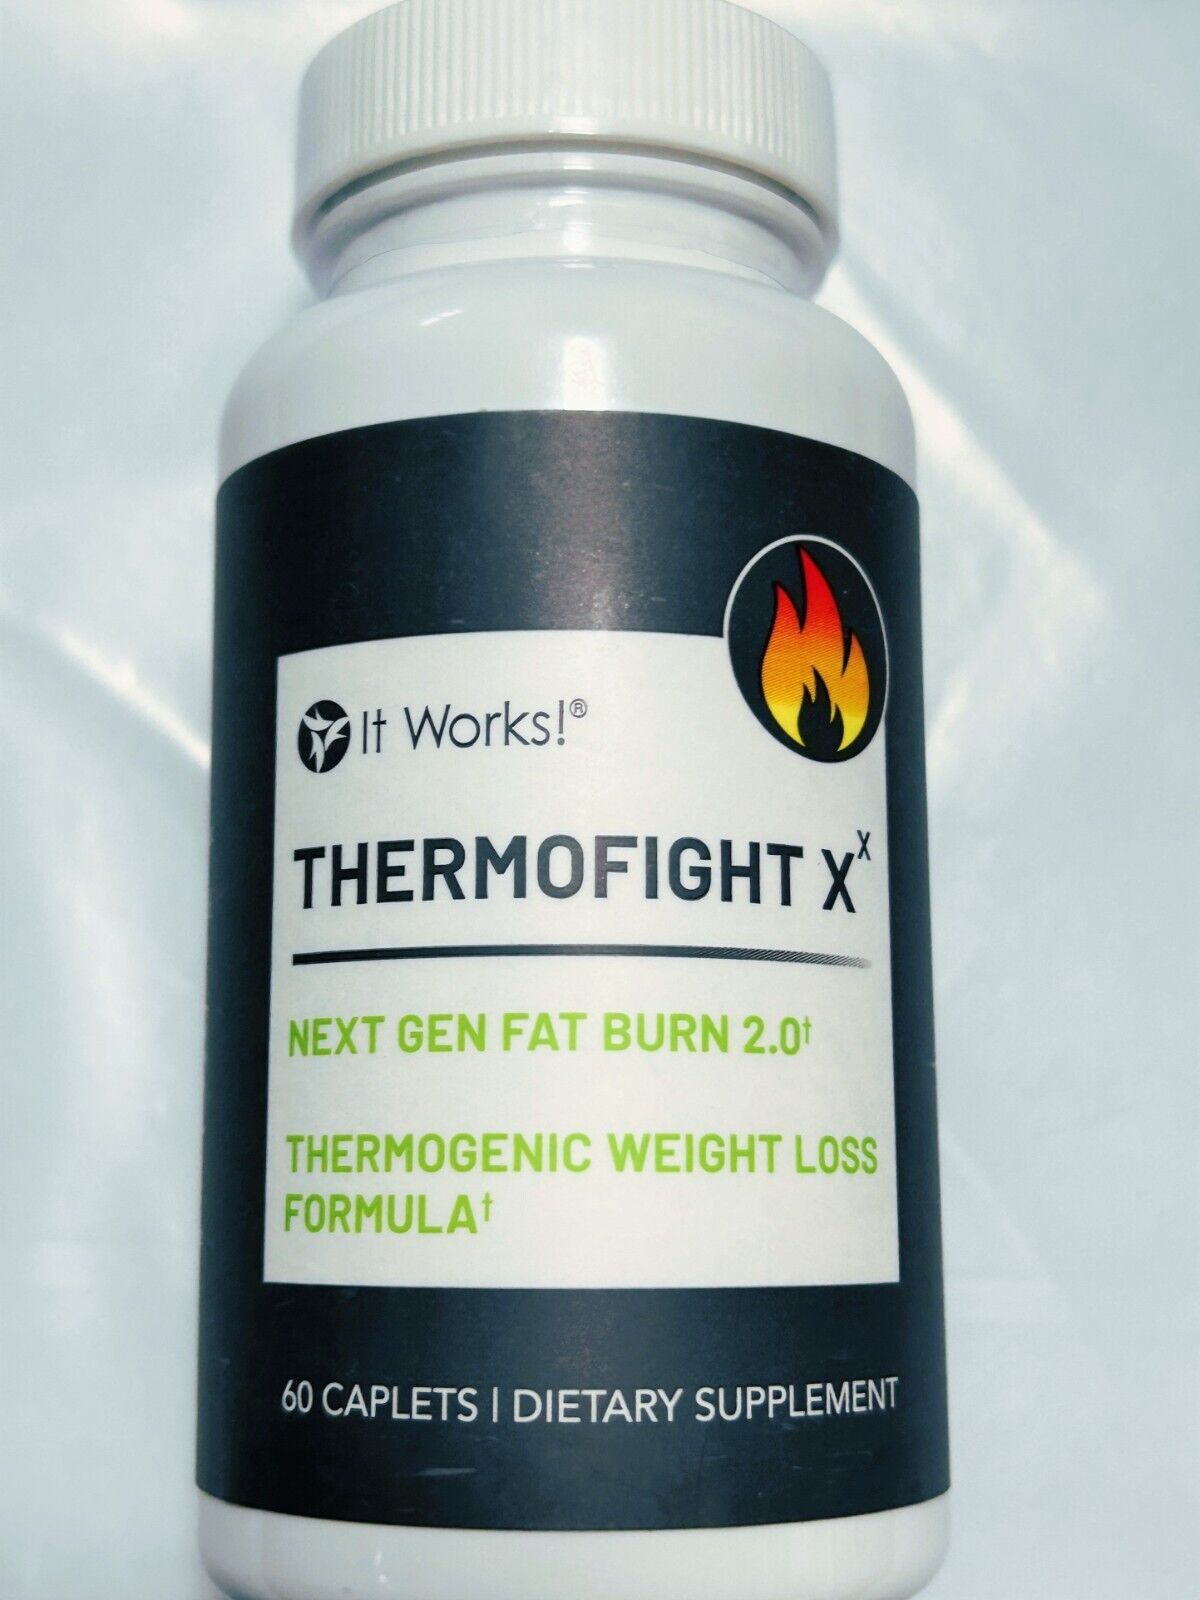 It Works! Thermofight X 60 Capsules Next Gen Fat Burn New Improved Formula 12/23 - $39.85